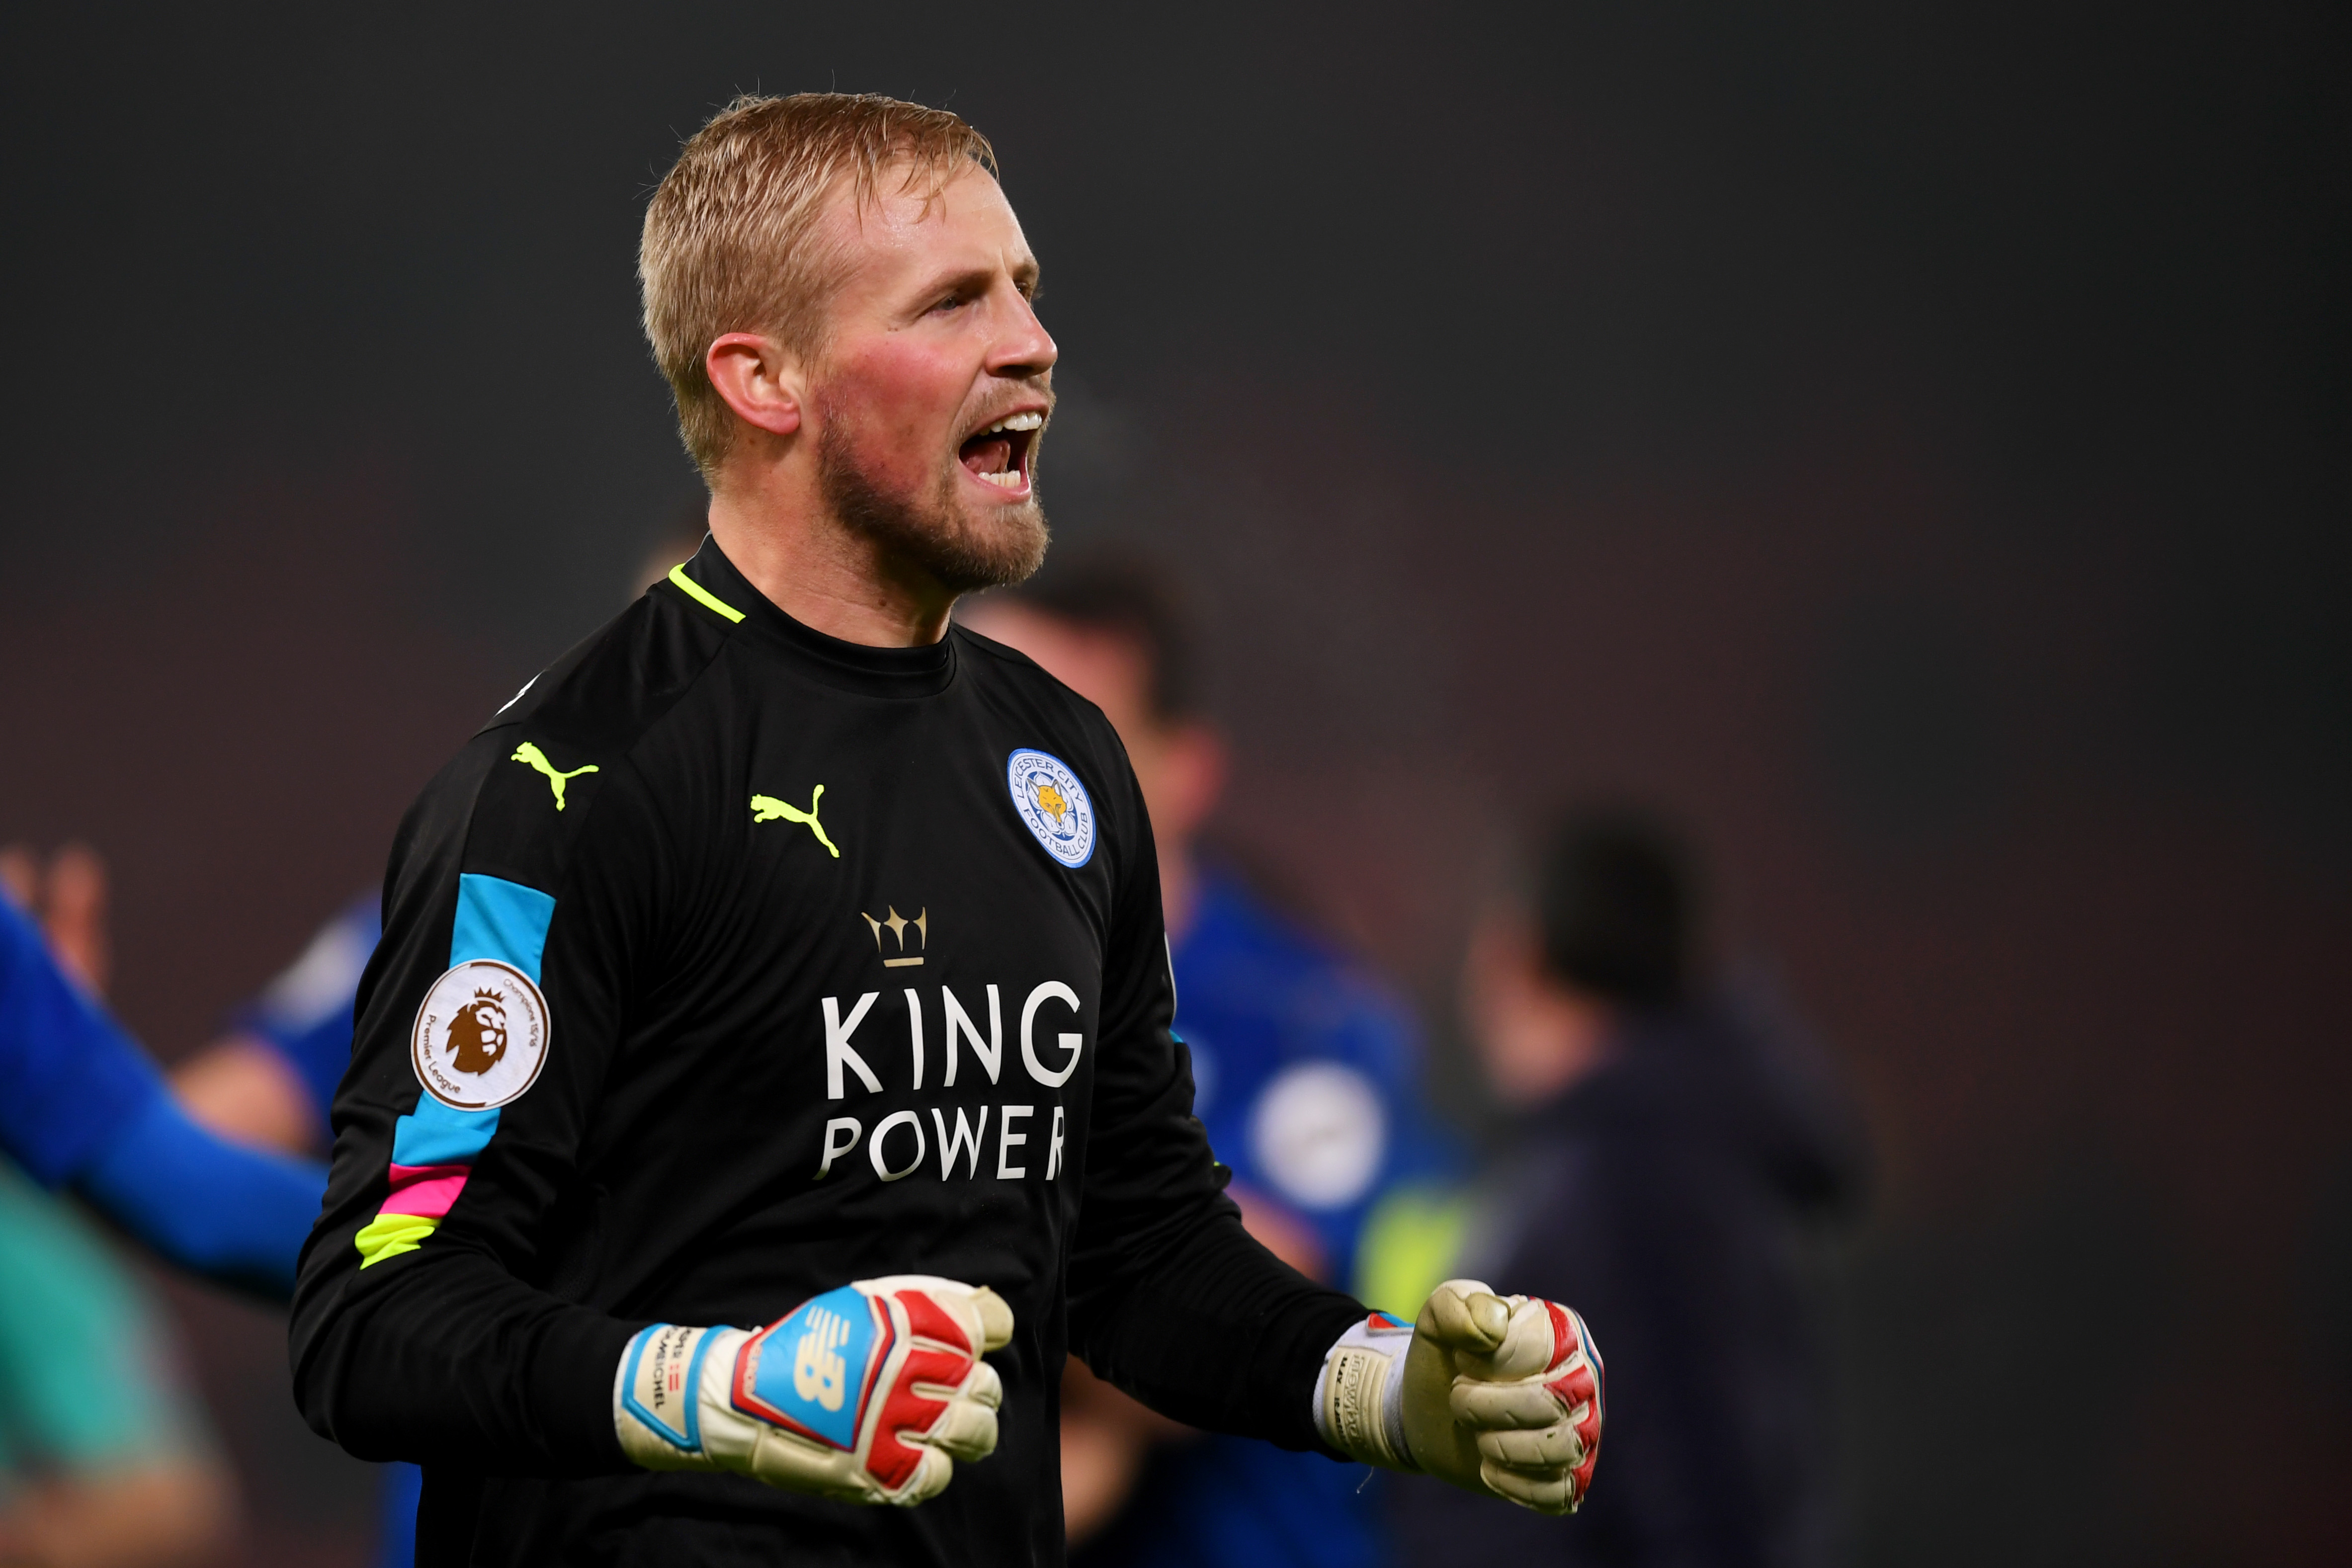 STOKE ON TRENT, ENGLAND - DECEMBER 17: Kasper Schmeichel of Leicester City celebrates after the final whistle during the Premier League match between Stoke City and Leicester City at Bet365 Stadium on December 17, 2016 in Stoke on Trent, England.  (Photo by Michael Regan/Getty Images)